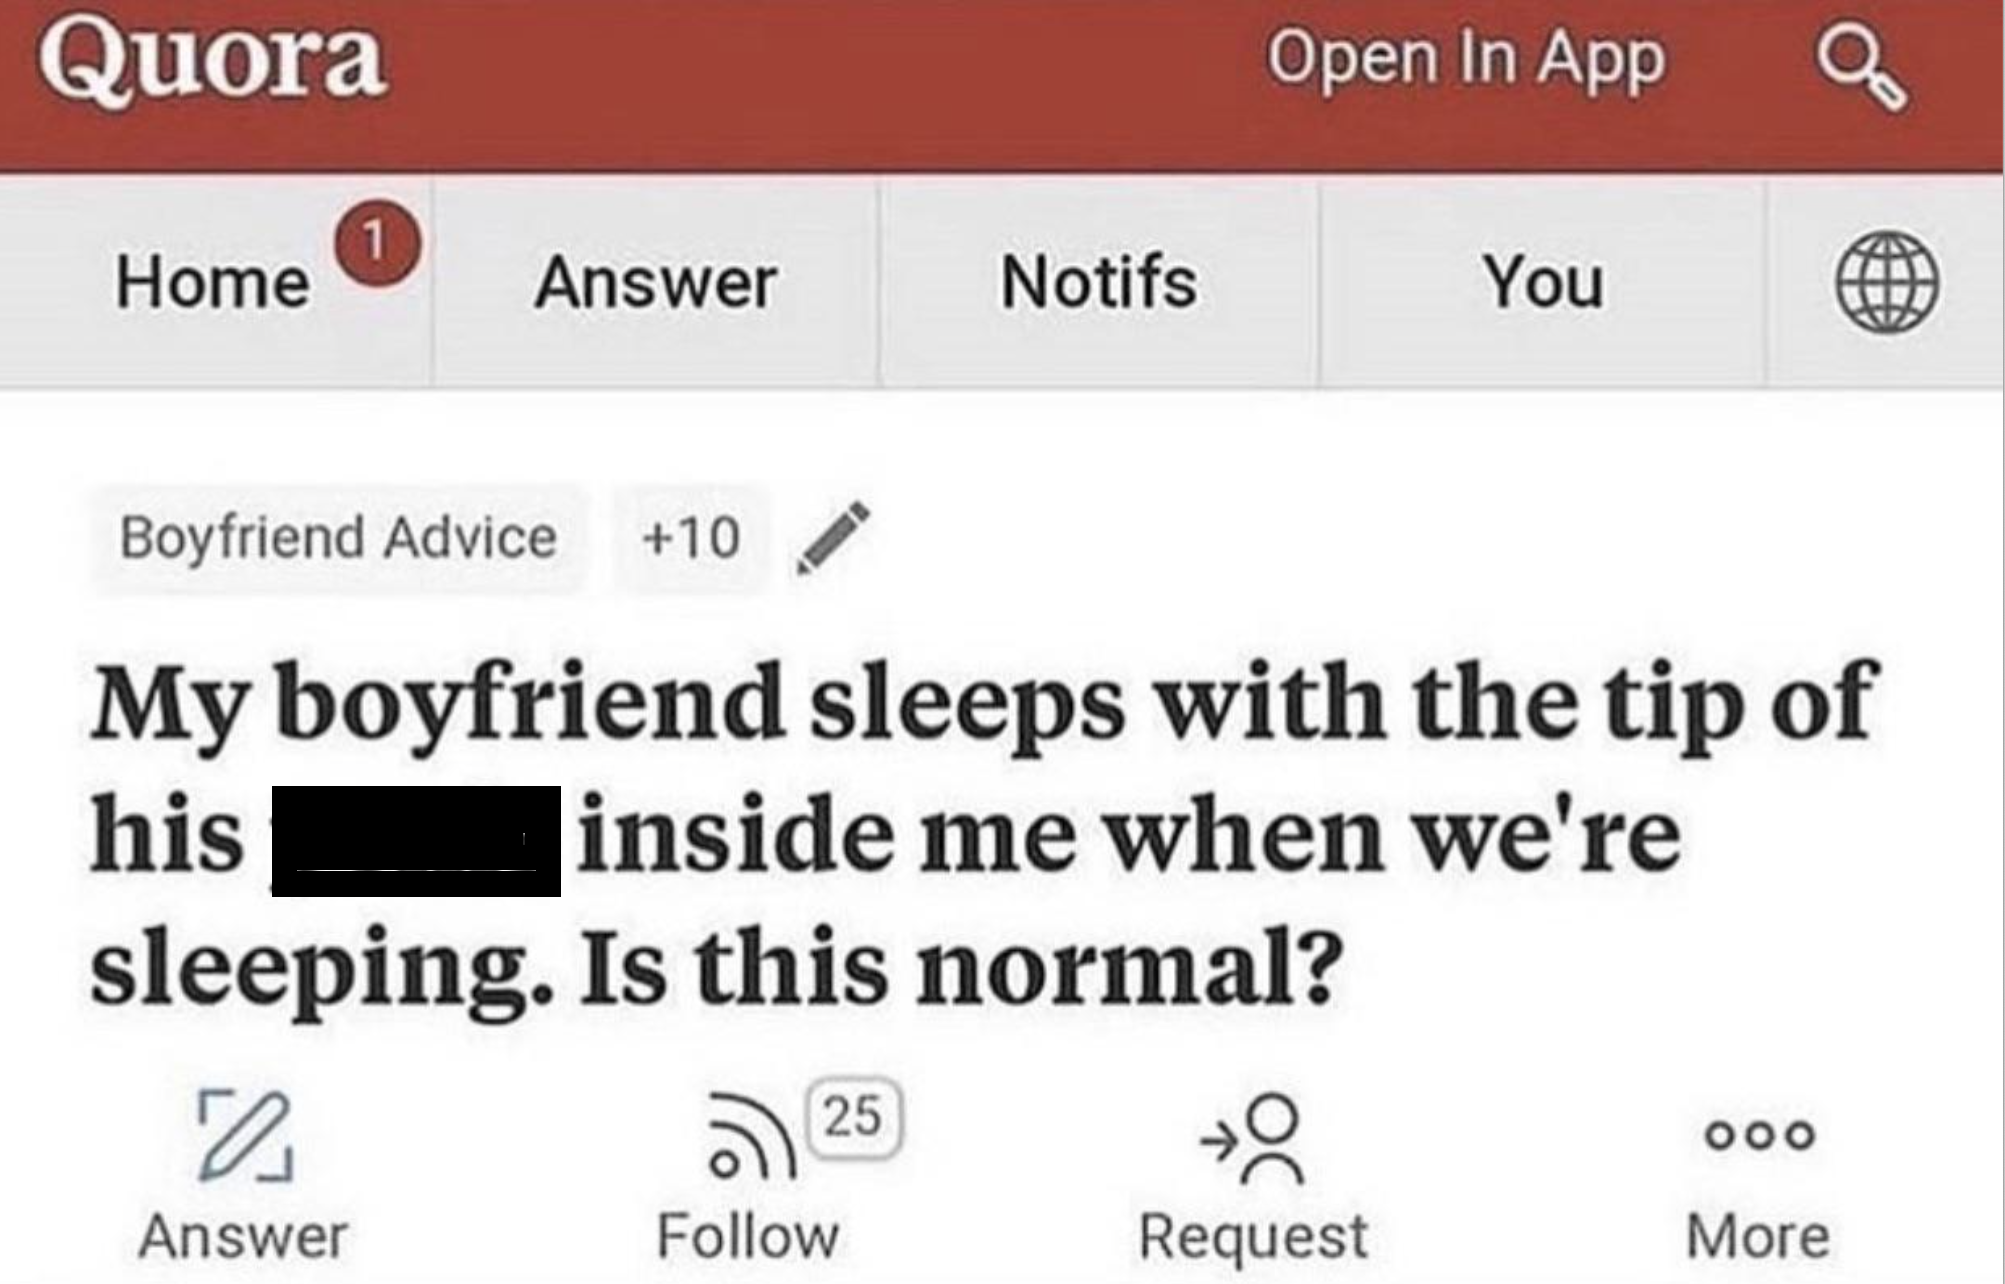 screenshot - Quora Open In App 1 Home Answer Notifs You Boyfriend Advice 10 My boyfriend sleeps with the tip of inside me when we're his sleeping. Is this normal? 25 000 Answer Request More